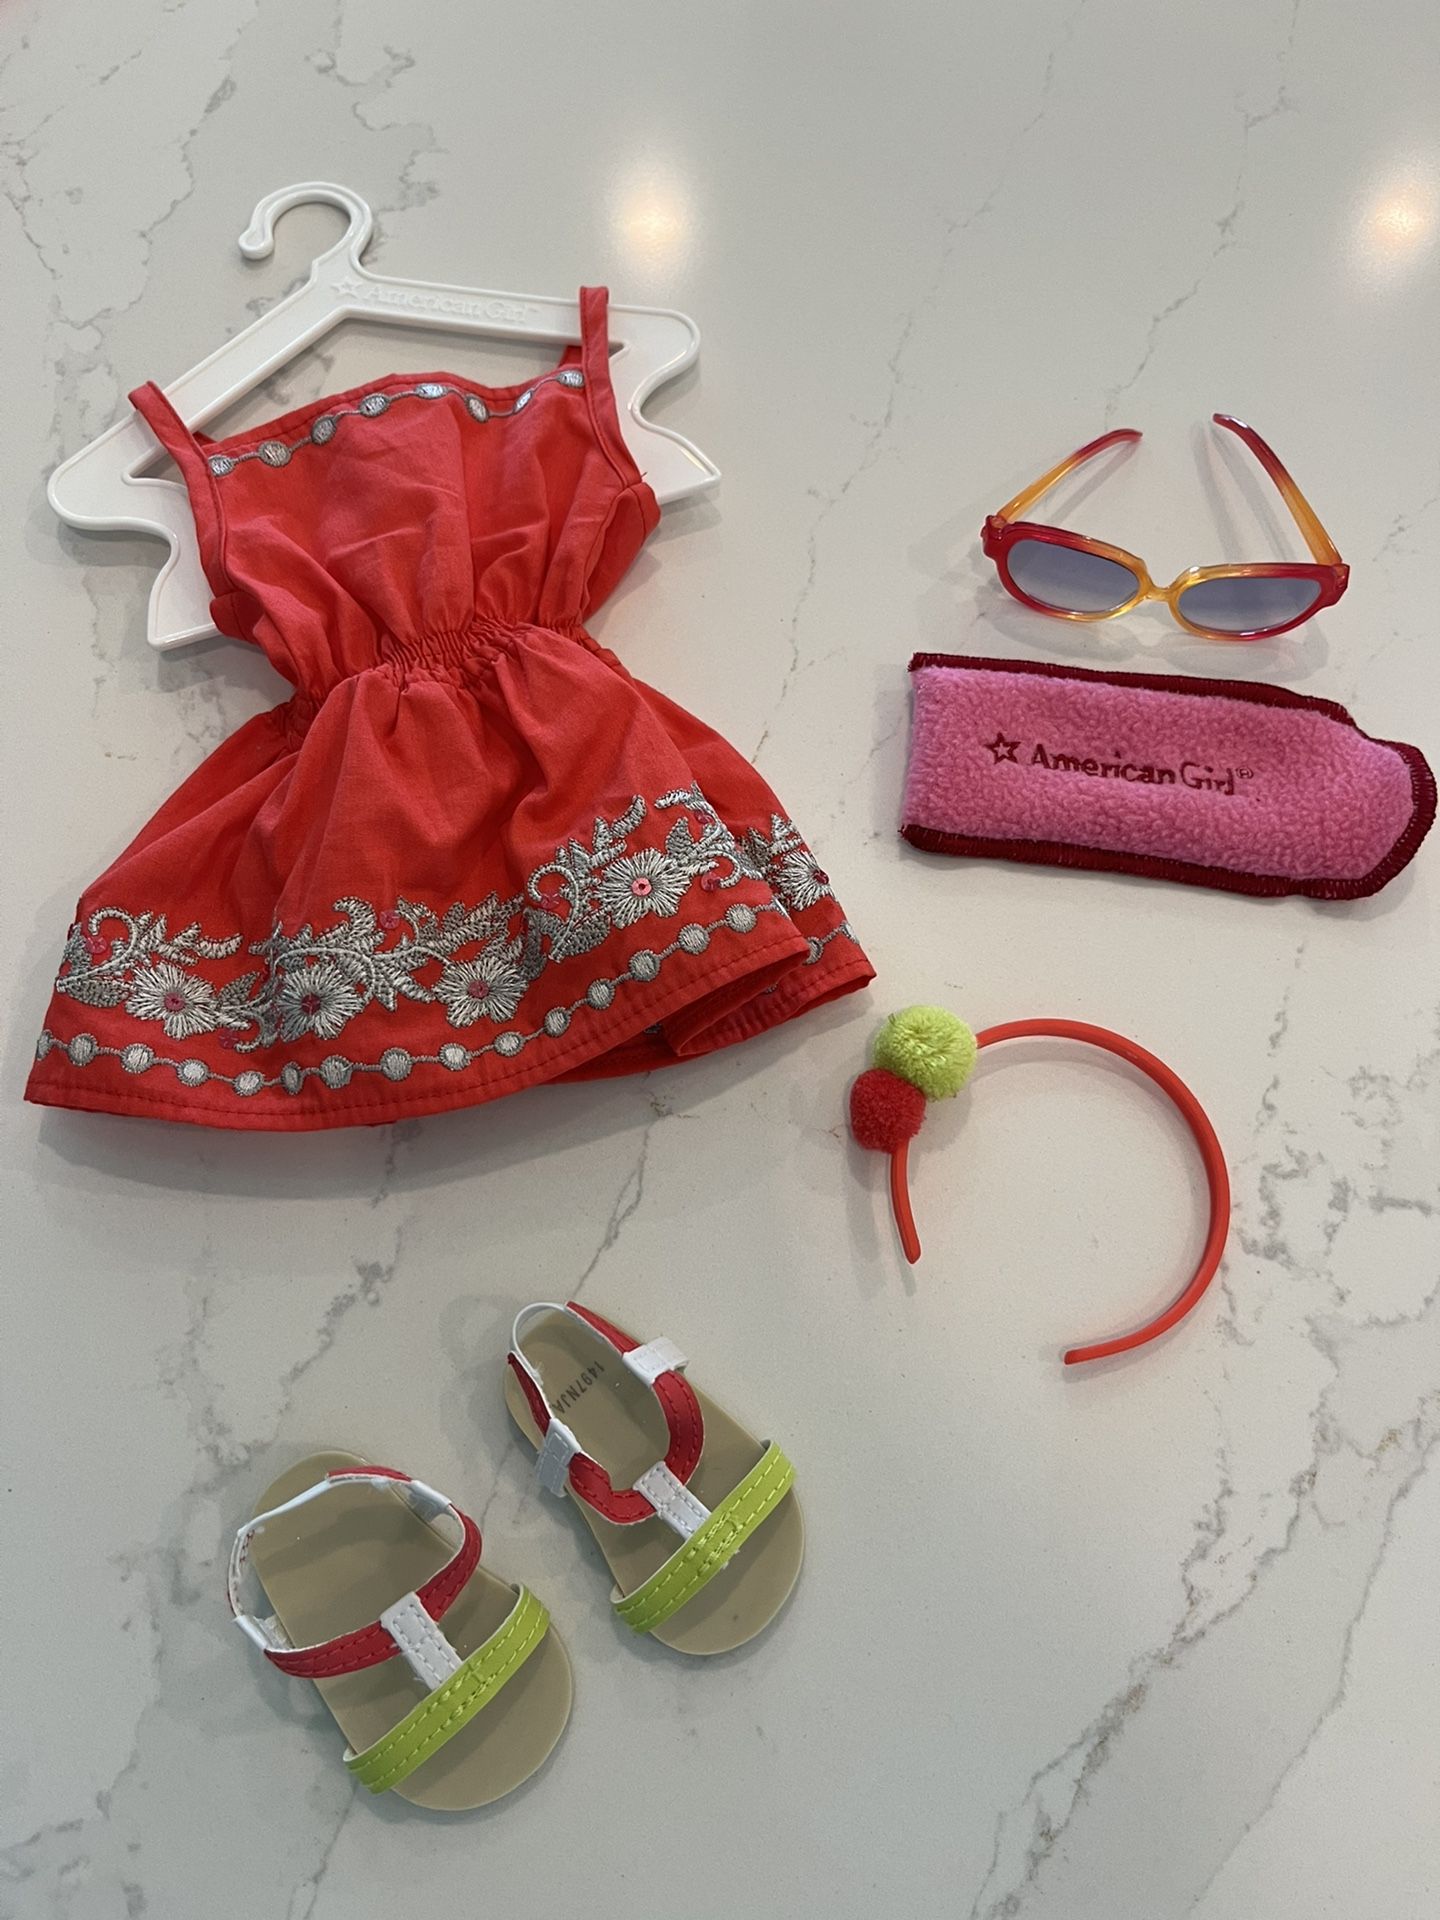 American Girl Doll Clothing and Accessories